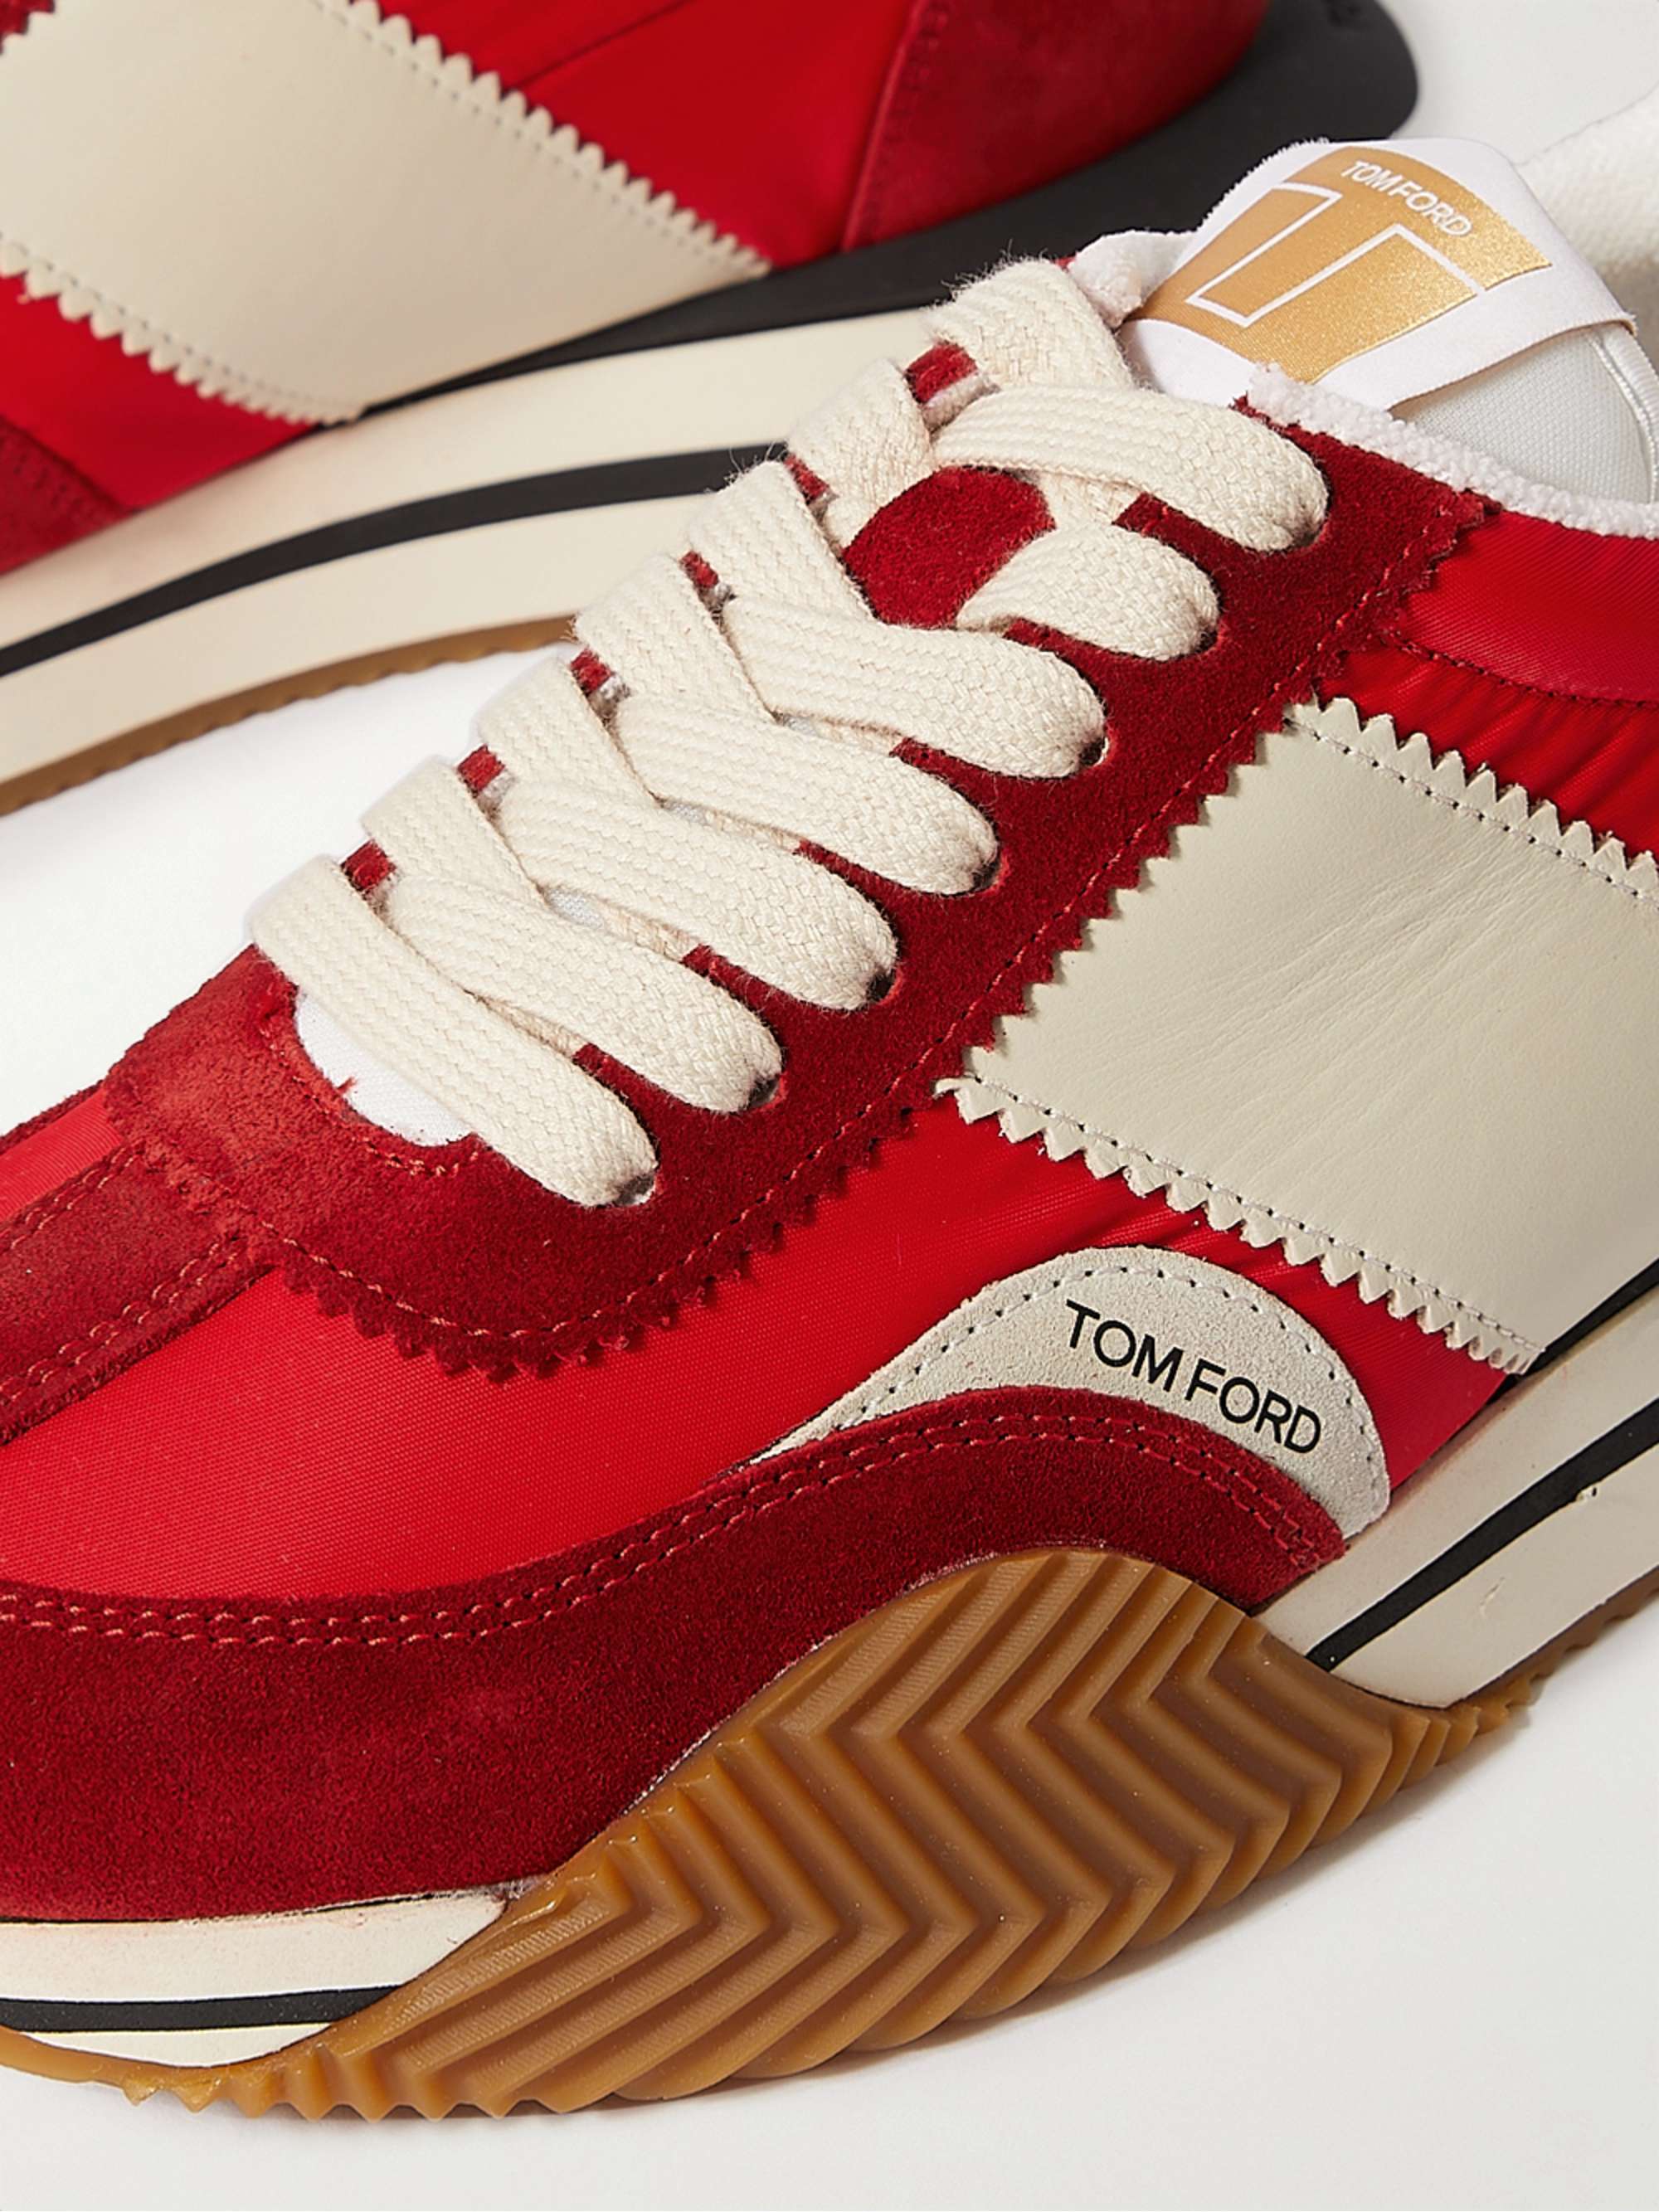 TOM FORD James Leather-Trimmed Nylon and Suede Sneakers